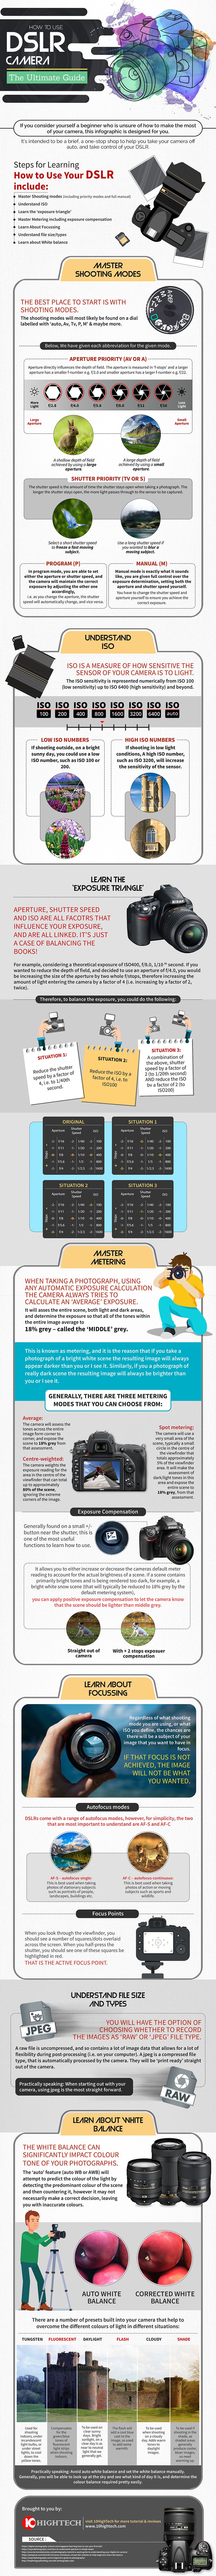 How to Use DSLR Camera The Ultimate Beginners Guide